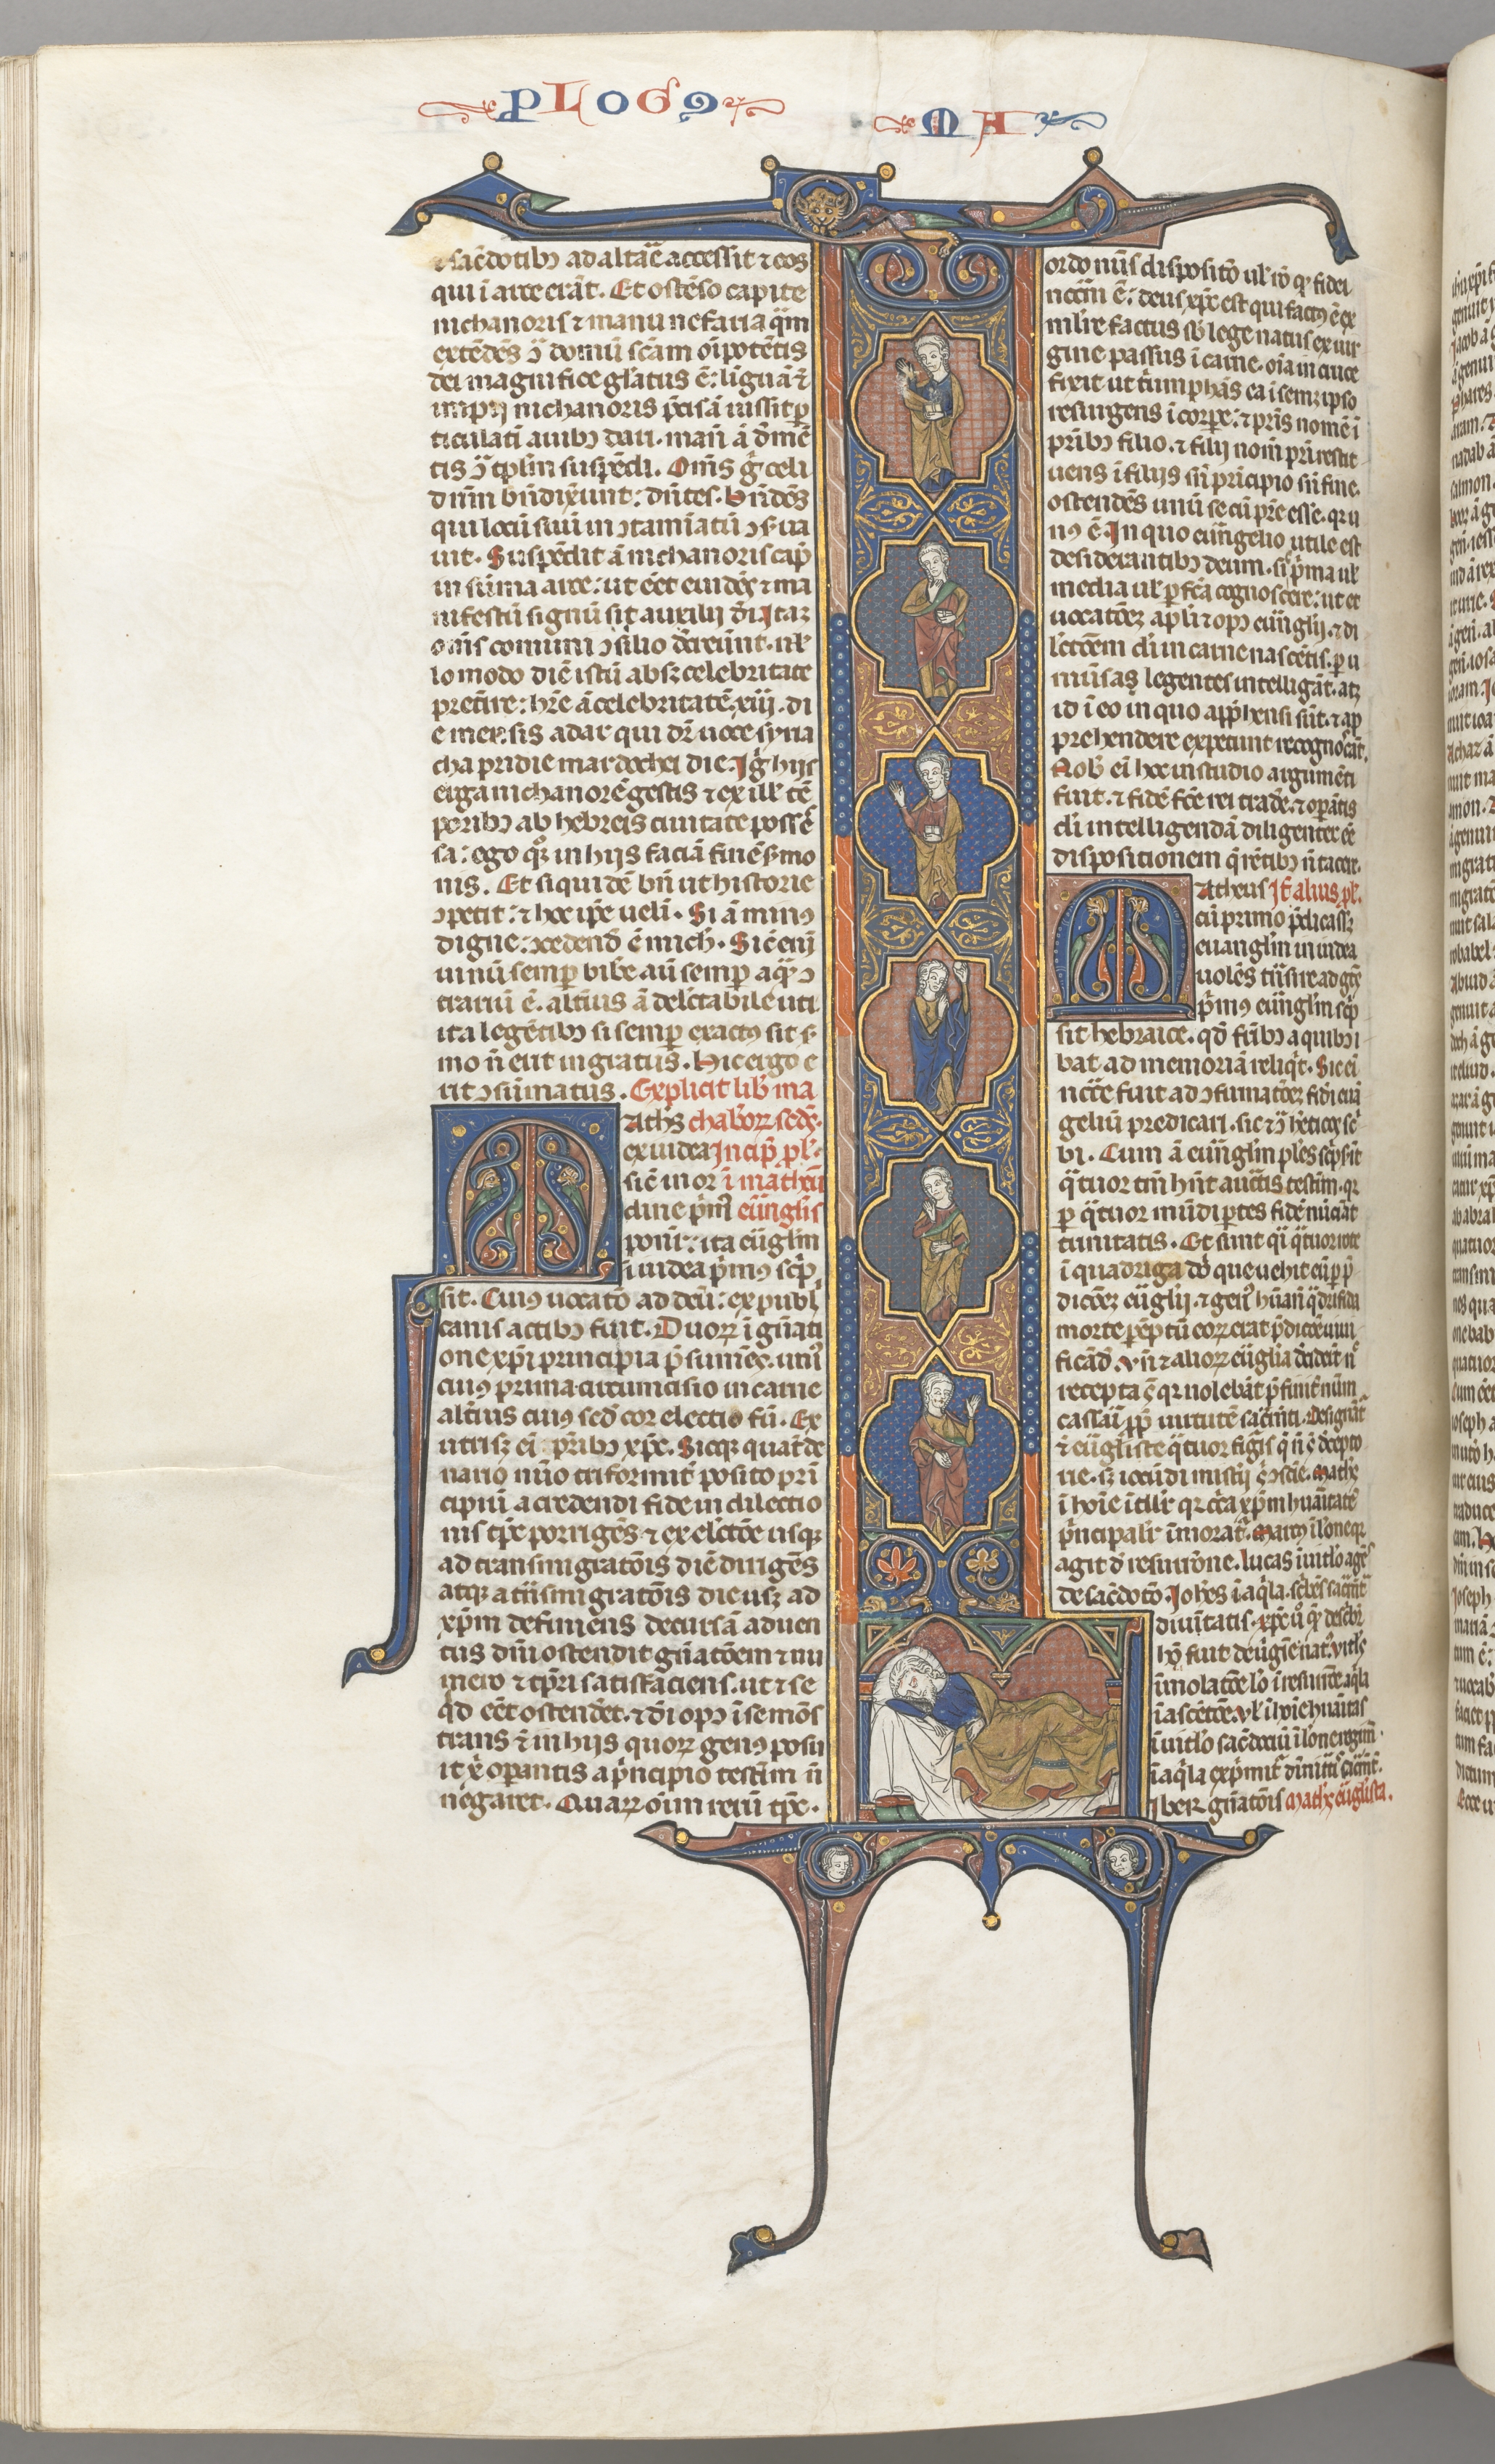 Fol. 391v, Matthew, full-length historiated initial L, the Tree of Jesse, with a sleeping Jesse at the base and six of the ancestors of Christ in irregular compartments